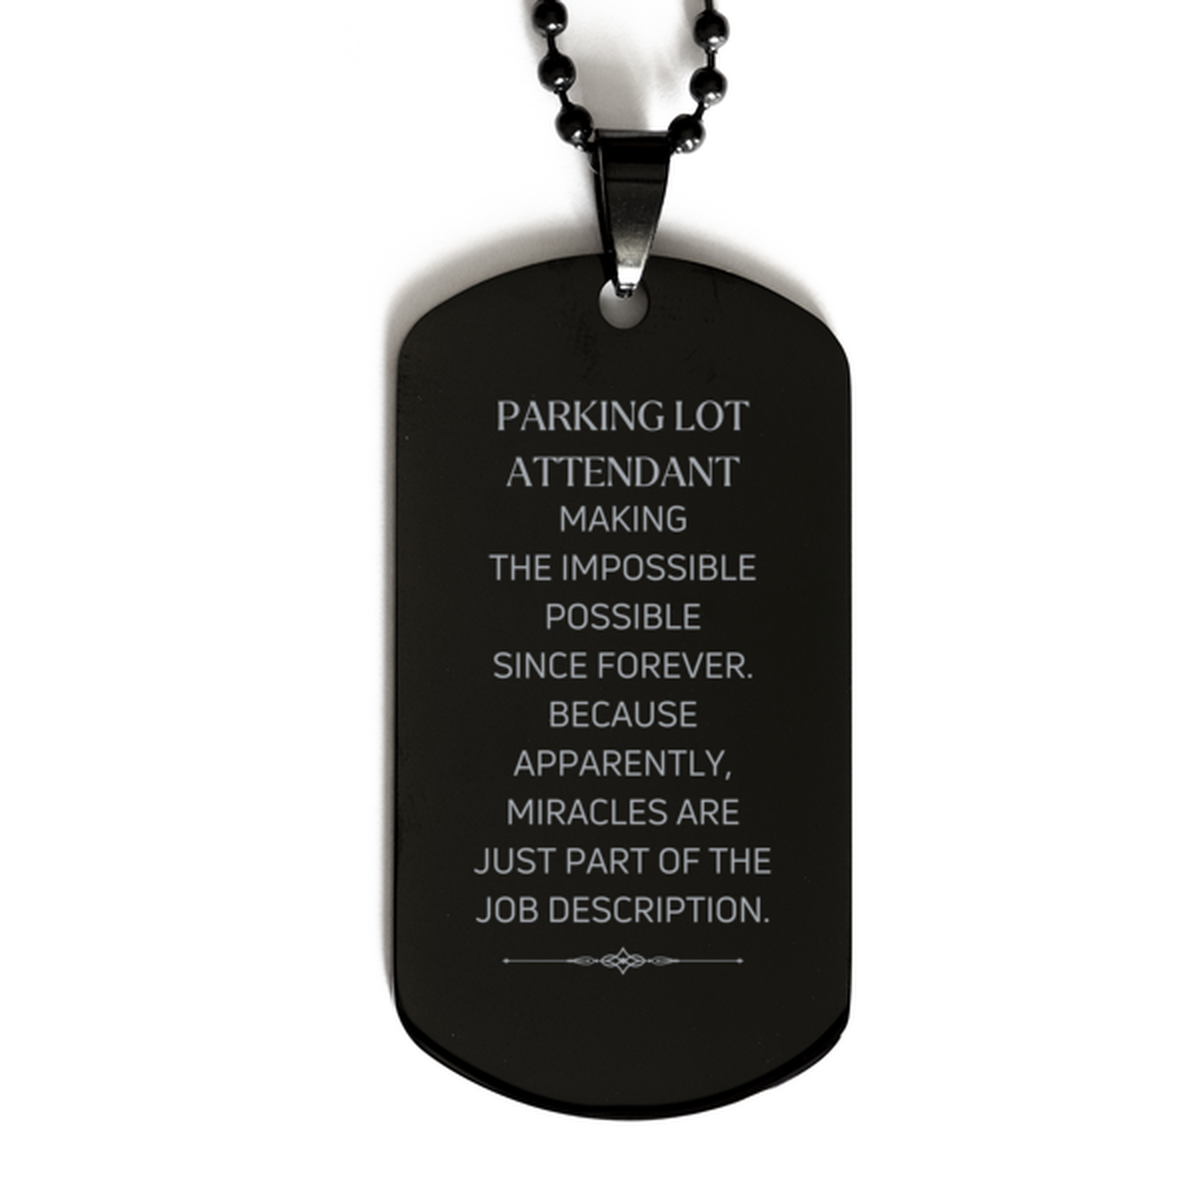 Funny Parking Lot Attendant Gifts, Miracles are just part of the job description, Inspirational Birthday Black Dog Tag For Parking Lot Attendant, Men, Women, Coworkers, Friends, Boss